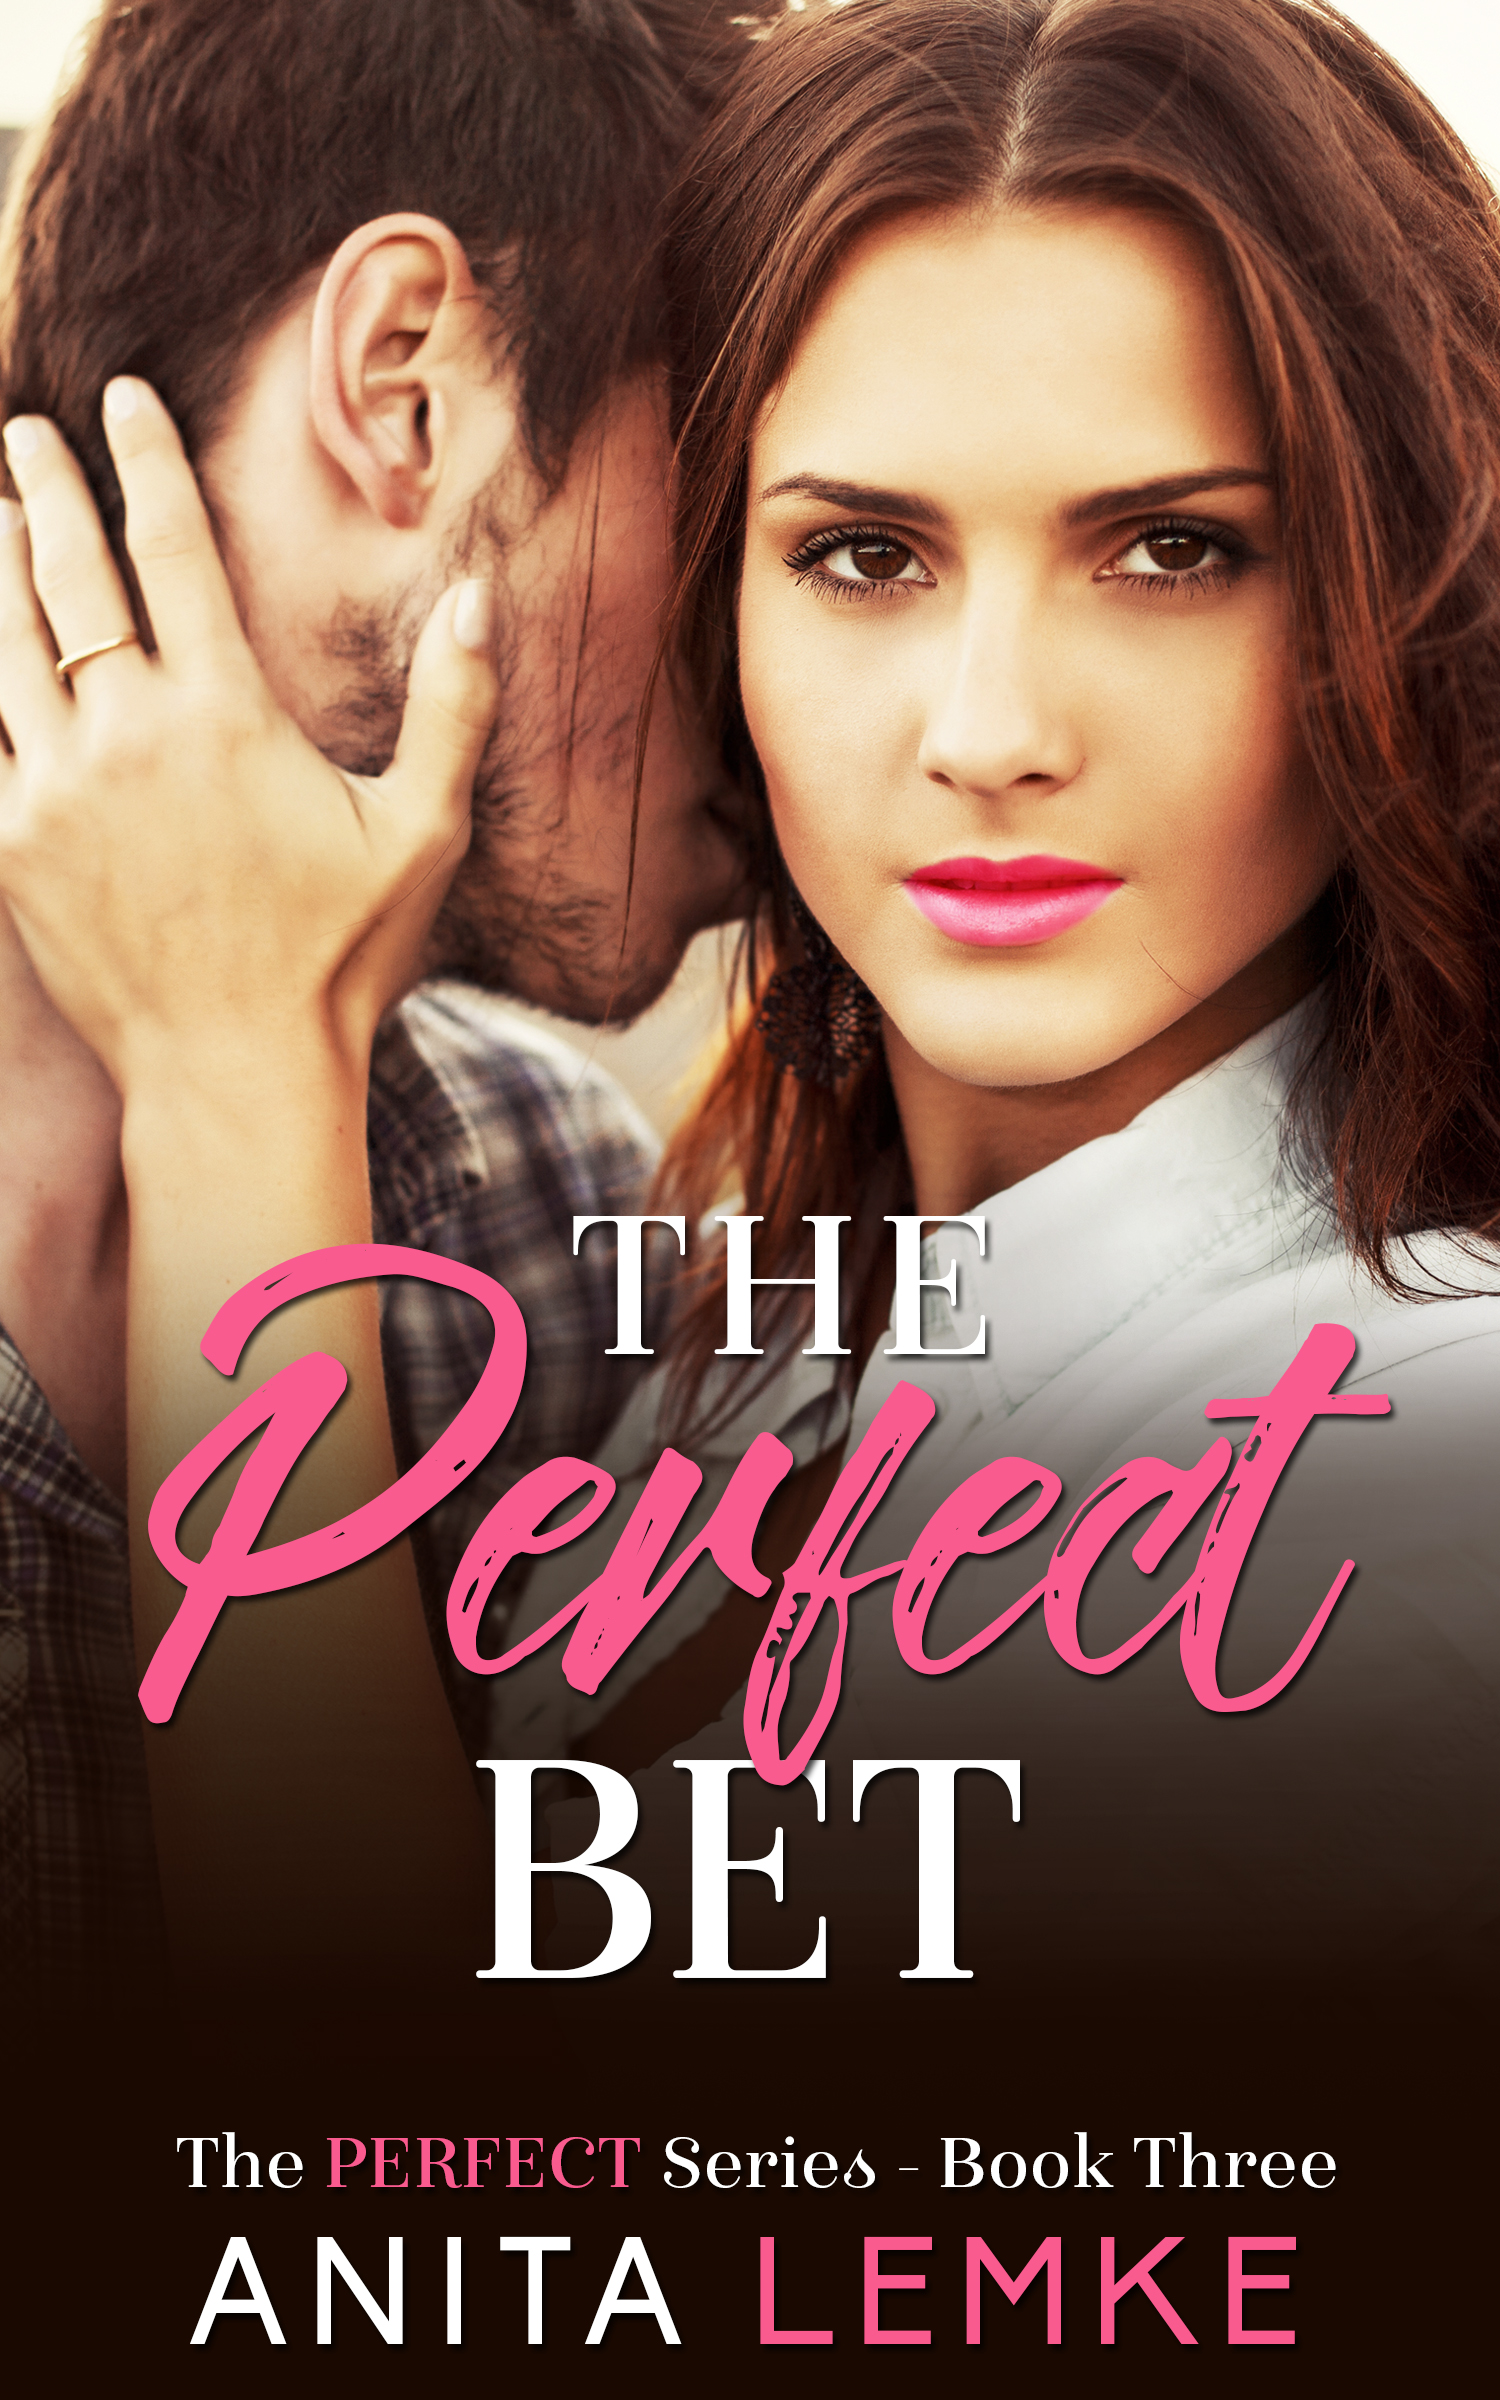 The Perfect Bet book cover